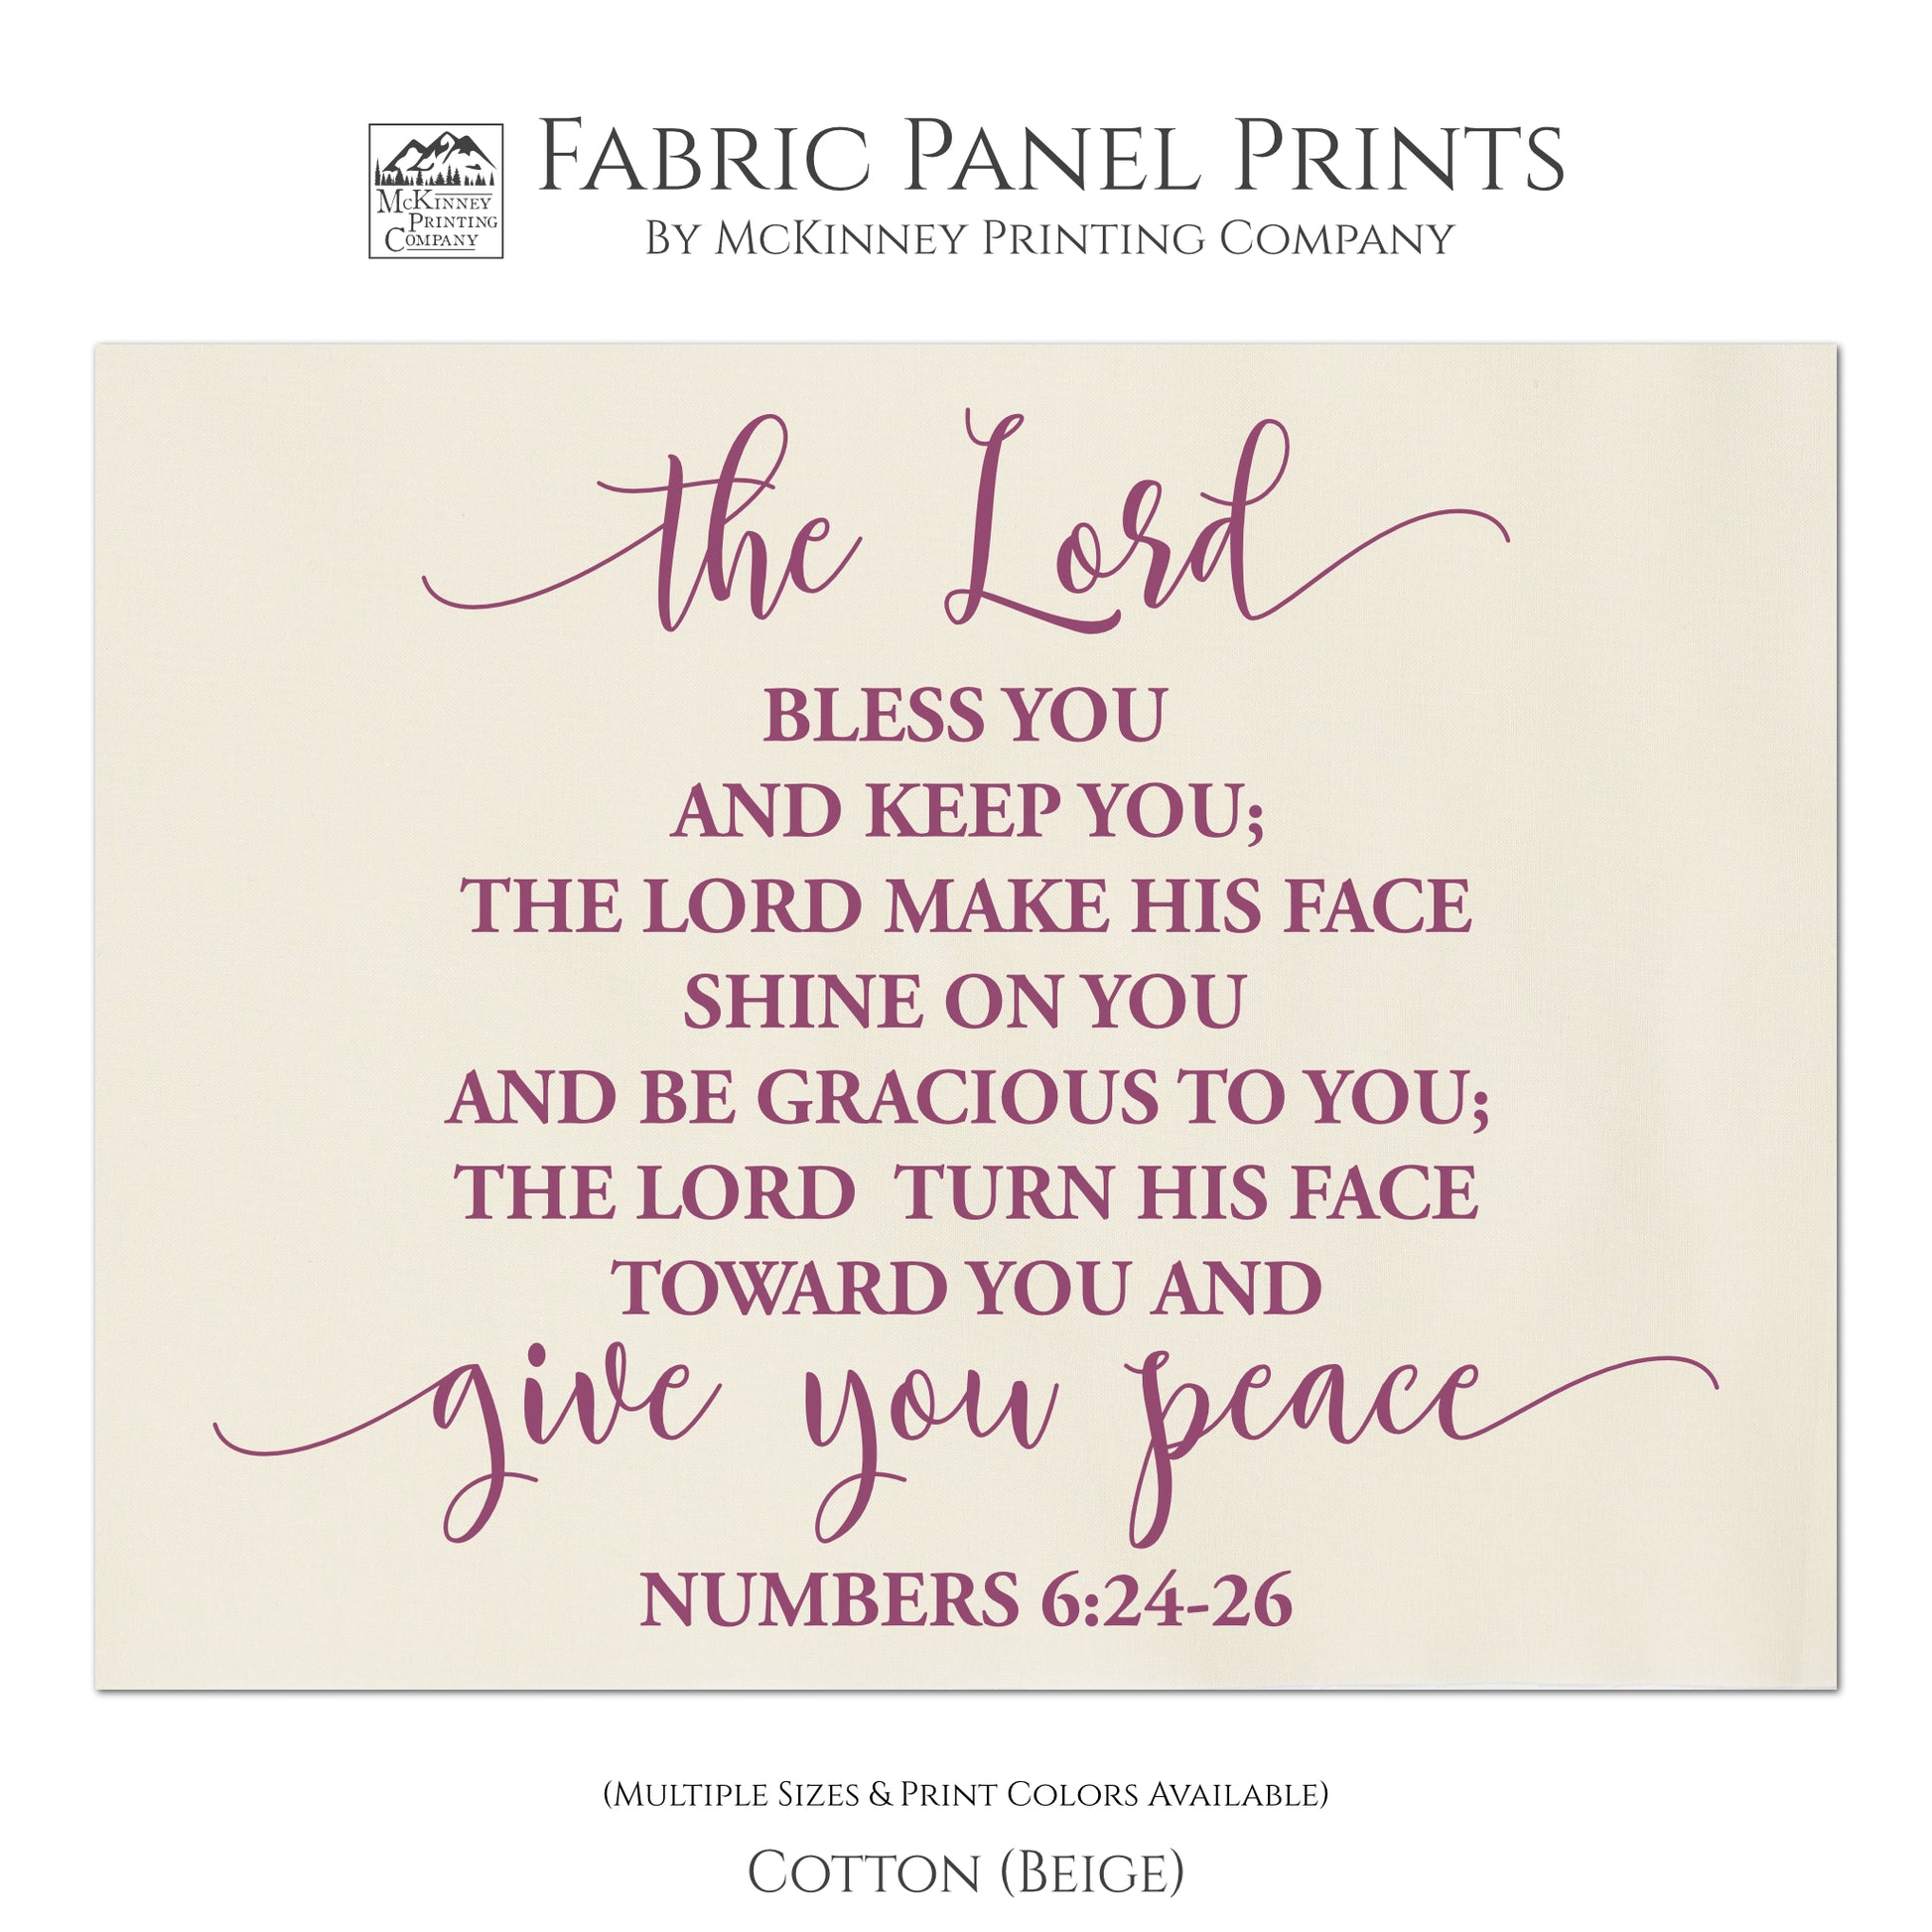 Numbers 6:24-26 - The Lord bless you and keep you; The Lord make His face shine on you and be gracious to you; The Lord turn his face toward you and give you peace. - Fabric Panel Print, Quilt Block - Cotton